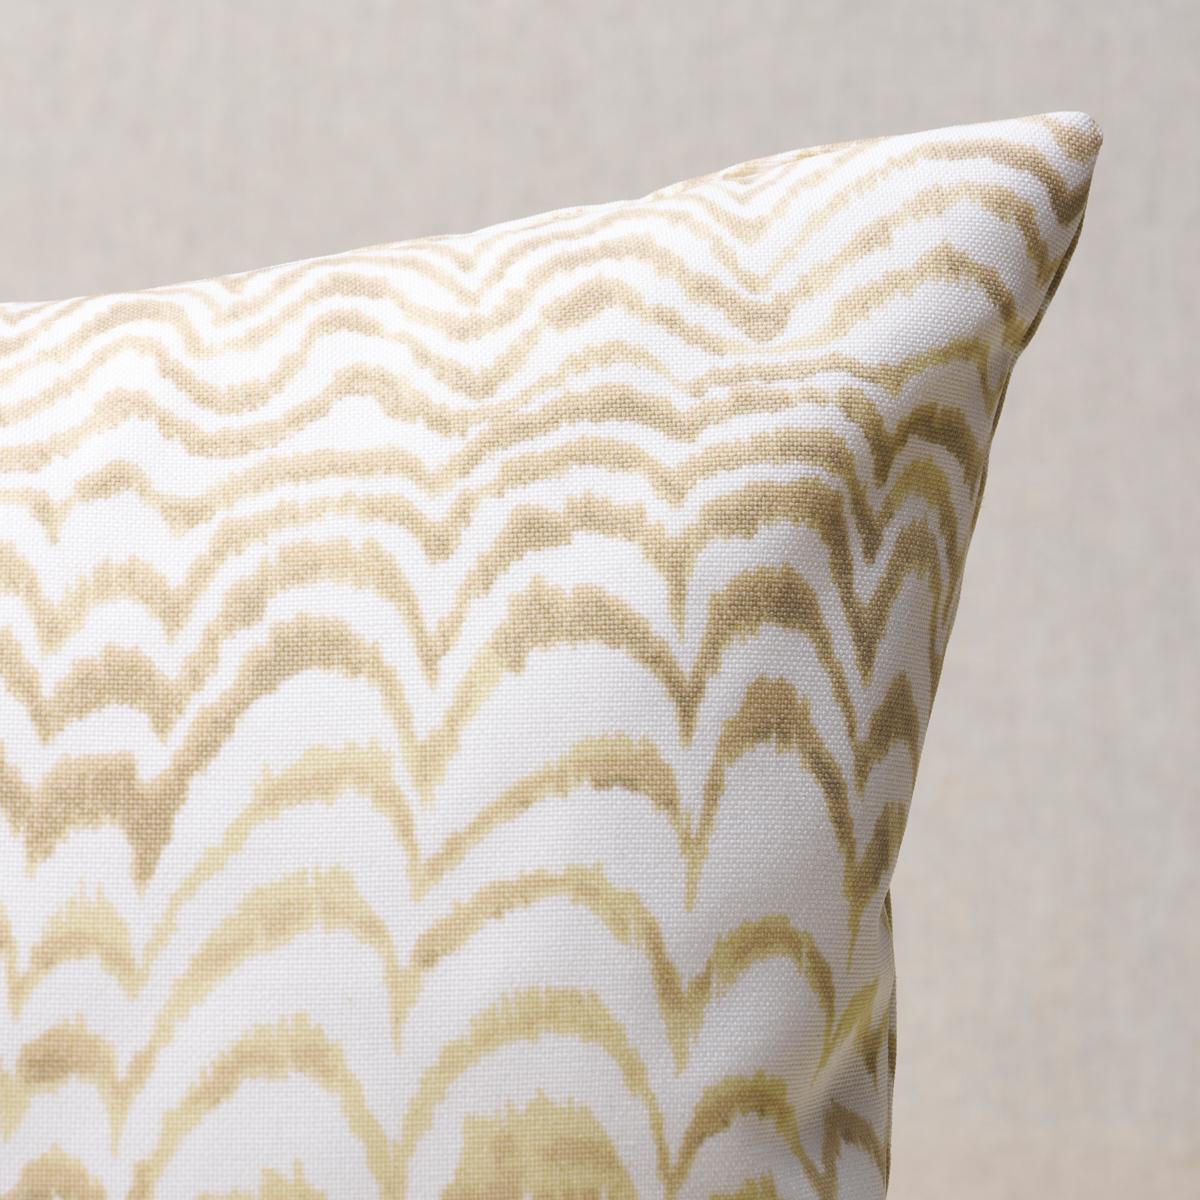 This pillow features Ink Wave Print Indoor/Outdoor by Trina Turk with a knife edge finish. With its unique rippled pattern and watery tones, Ink Wave Print Indoor/Outdoor fabric makes a fabulous statement wherever it goes. Pillow includes a polyfill